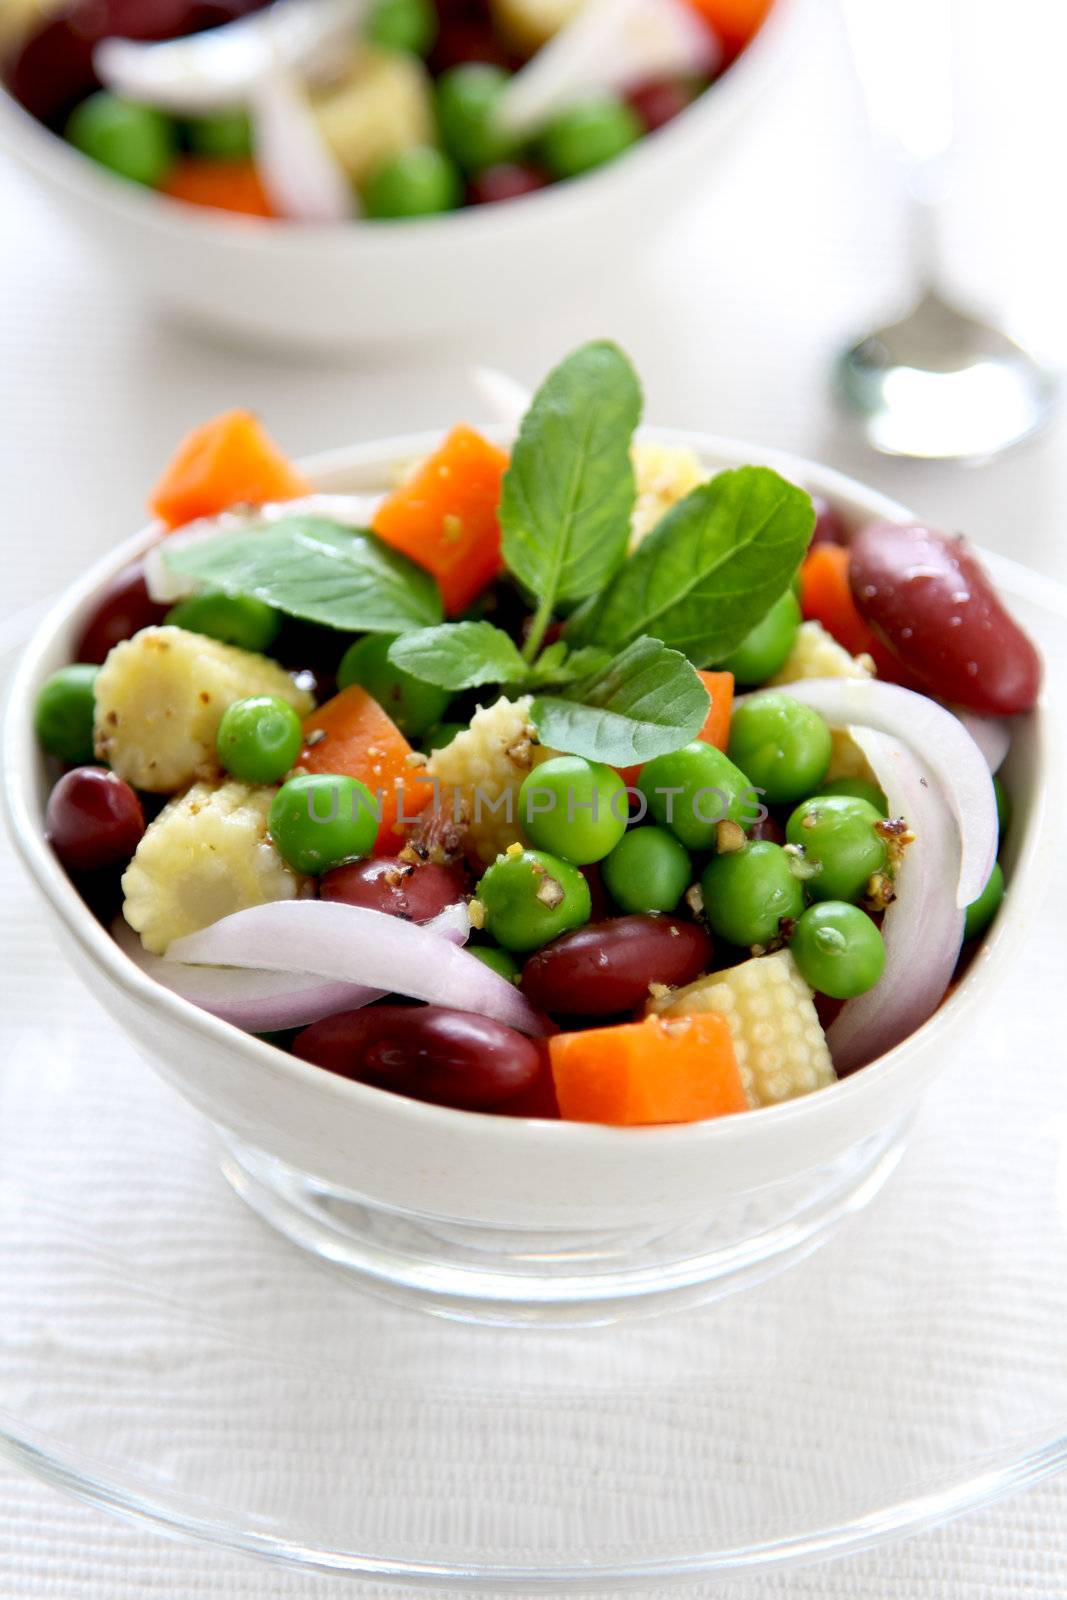 Beans & peas salad by vanillaechoes